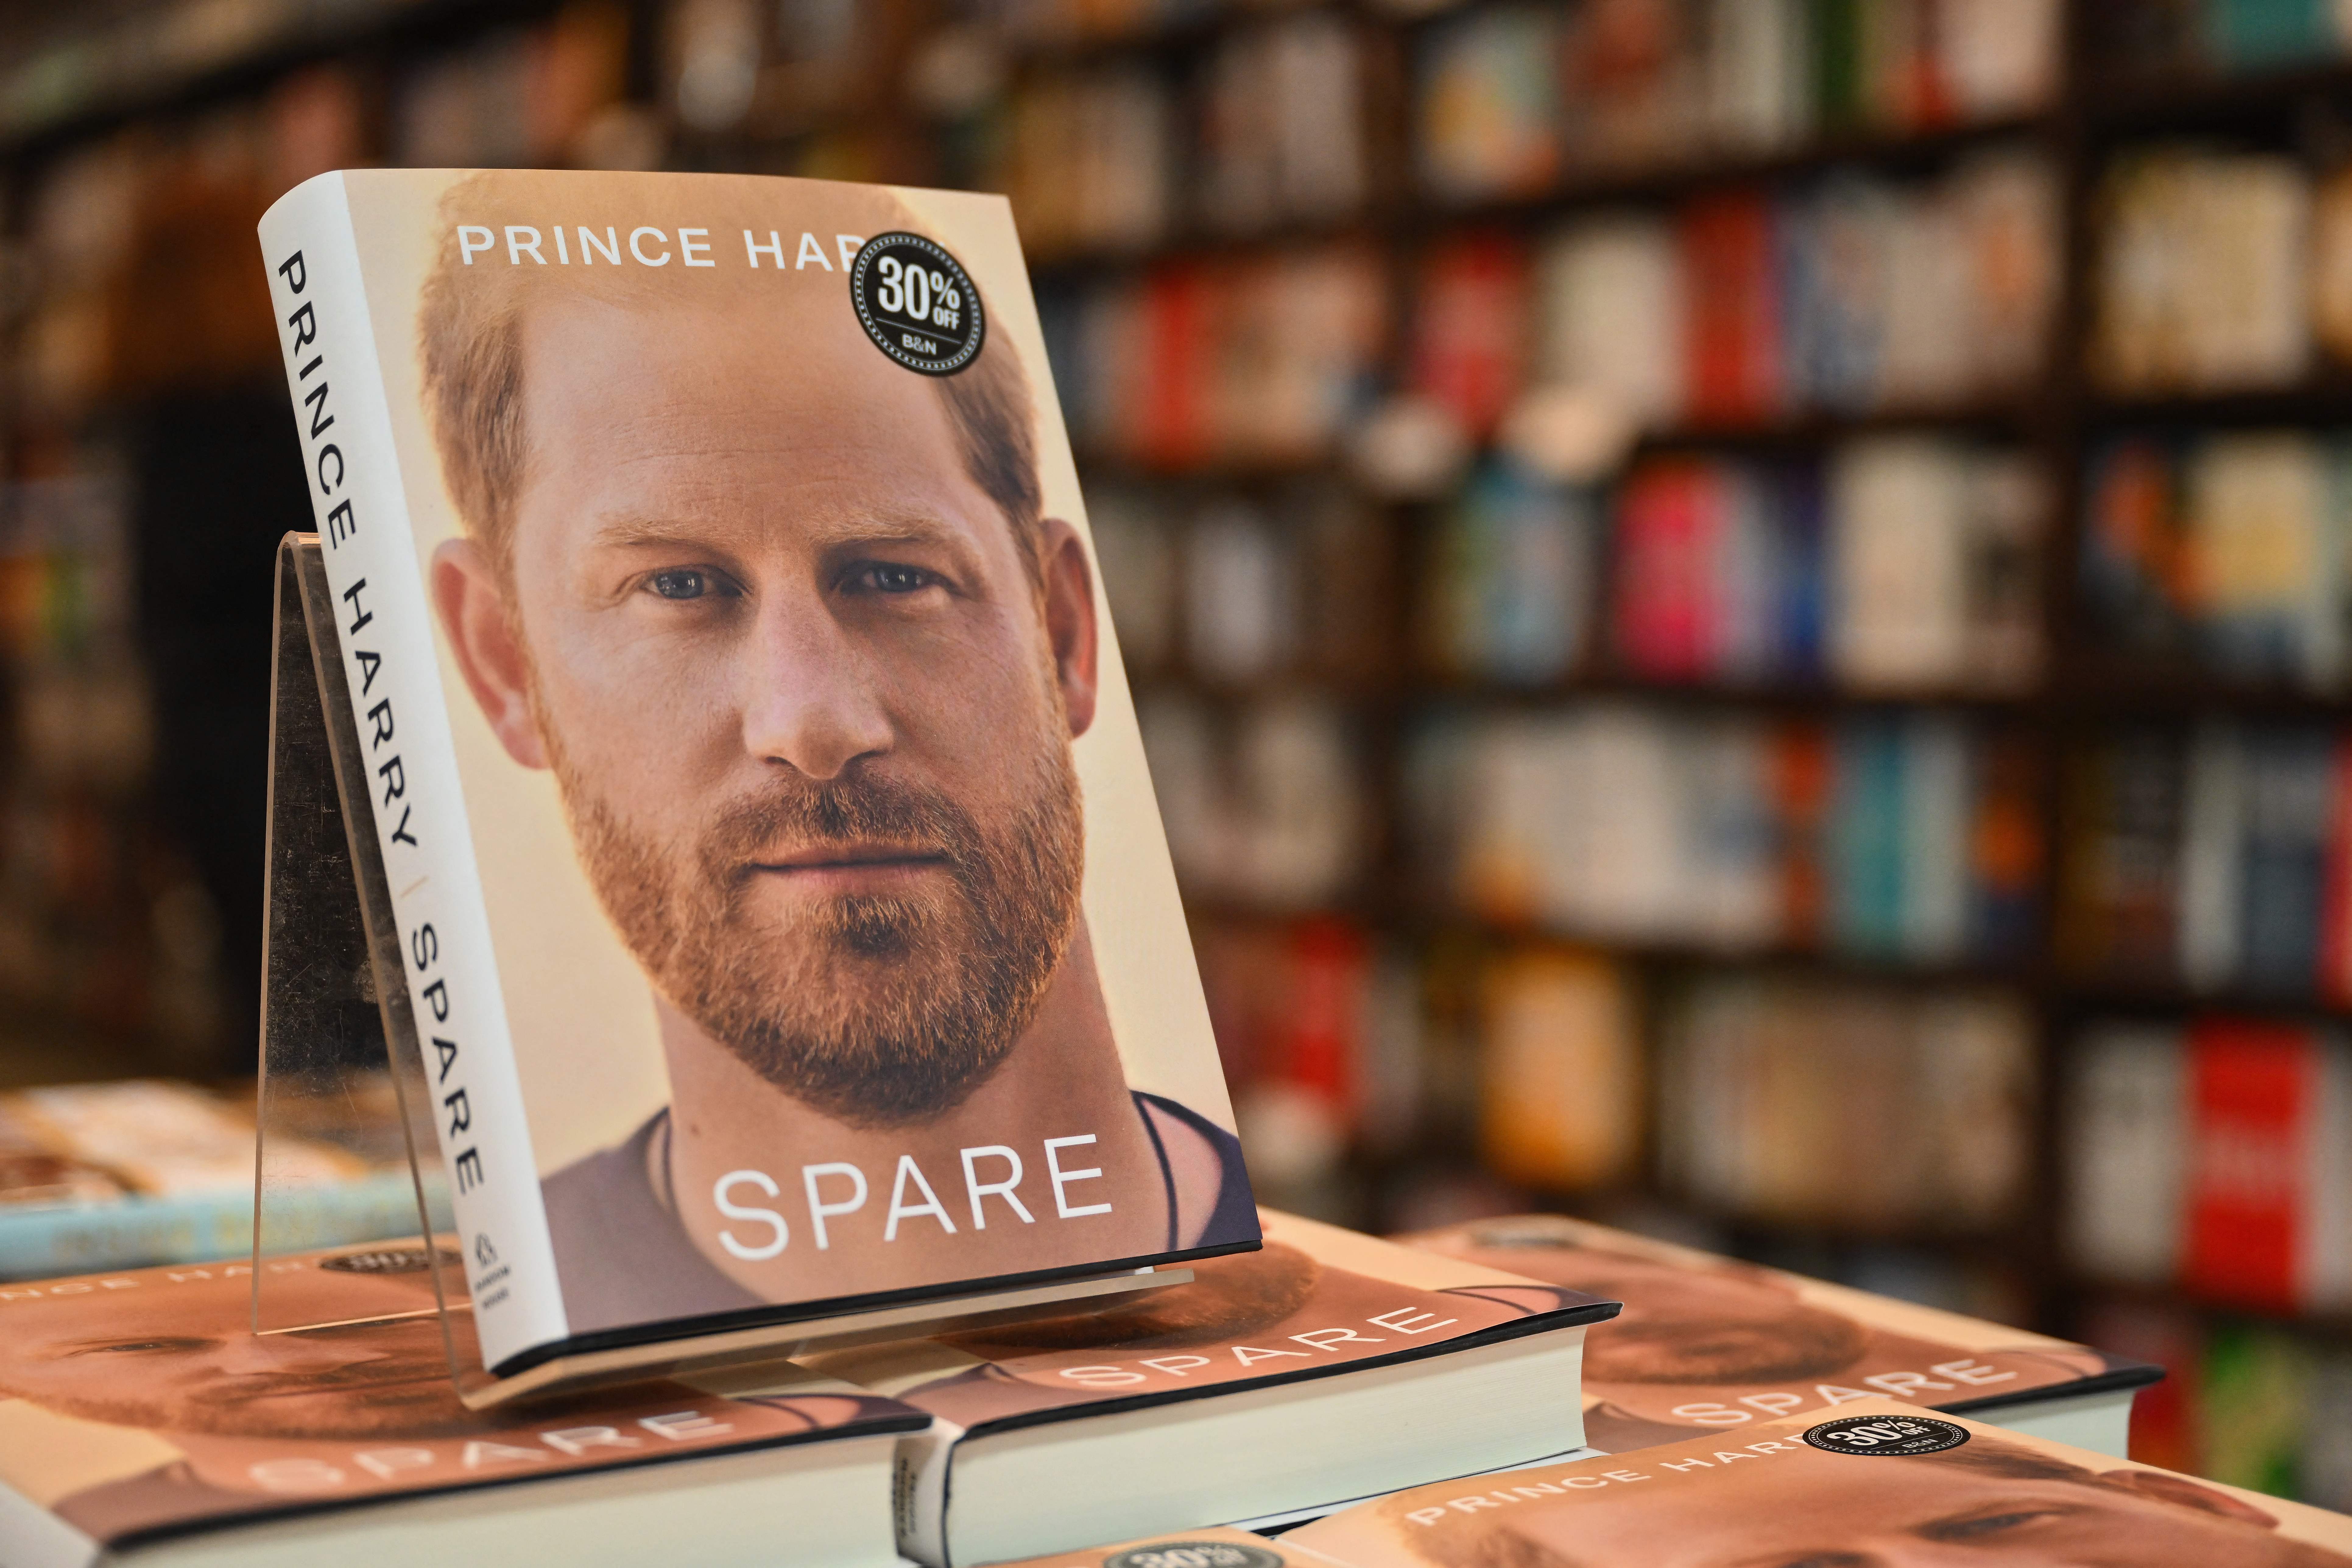 Copies of Prince Harry's book "Spare" display at a Barnes & Noble bookstore on January 10, 2023, in New York City. | Source: Getty Images